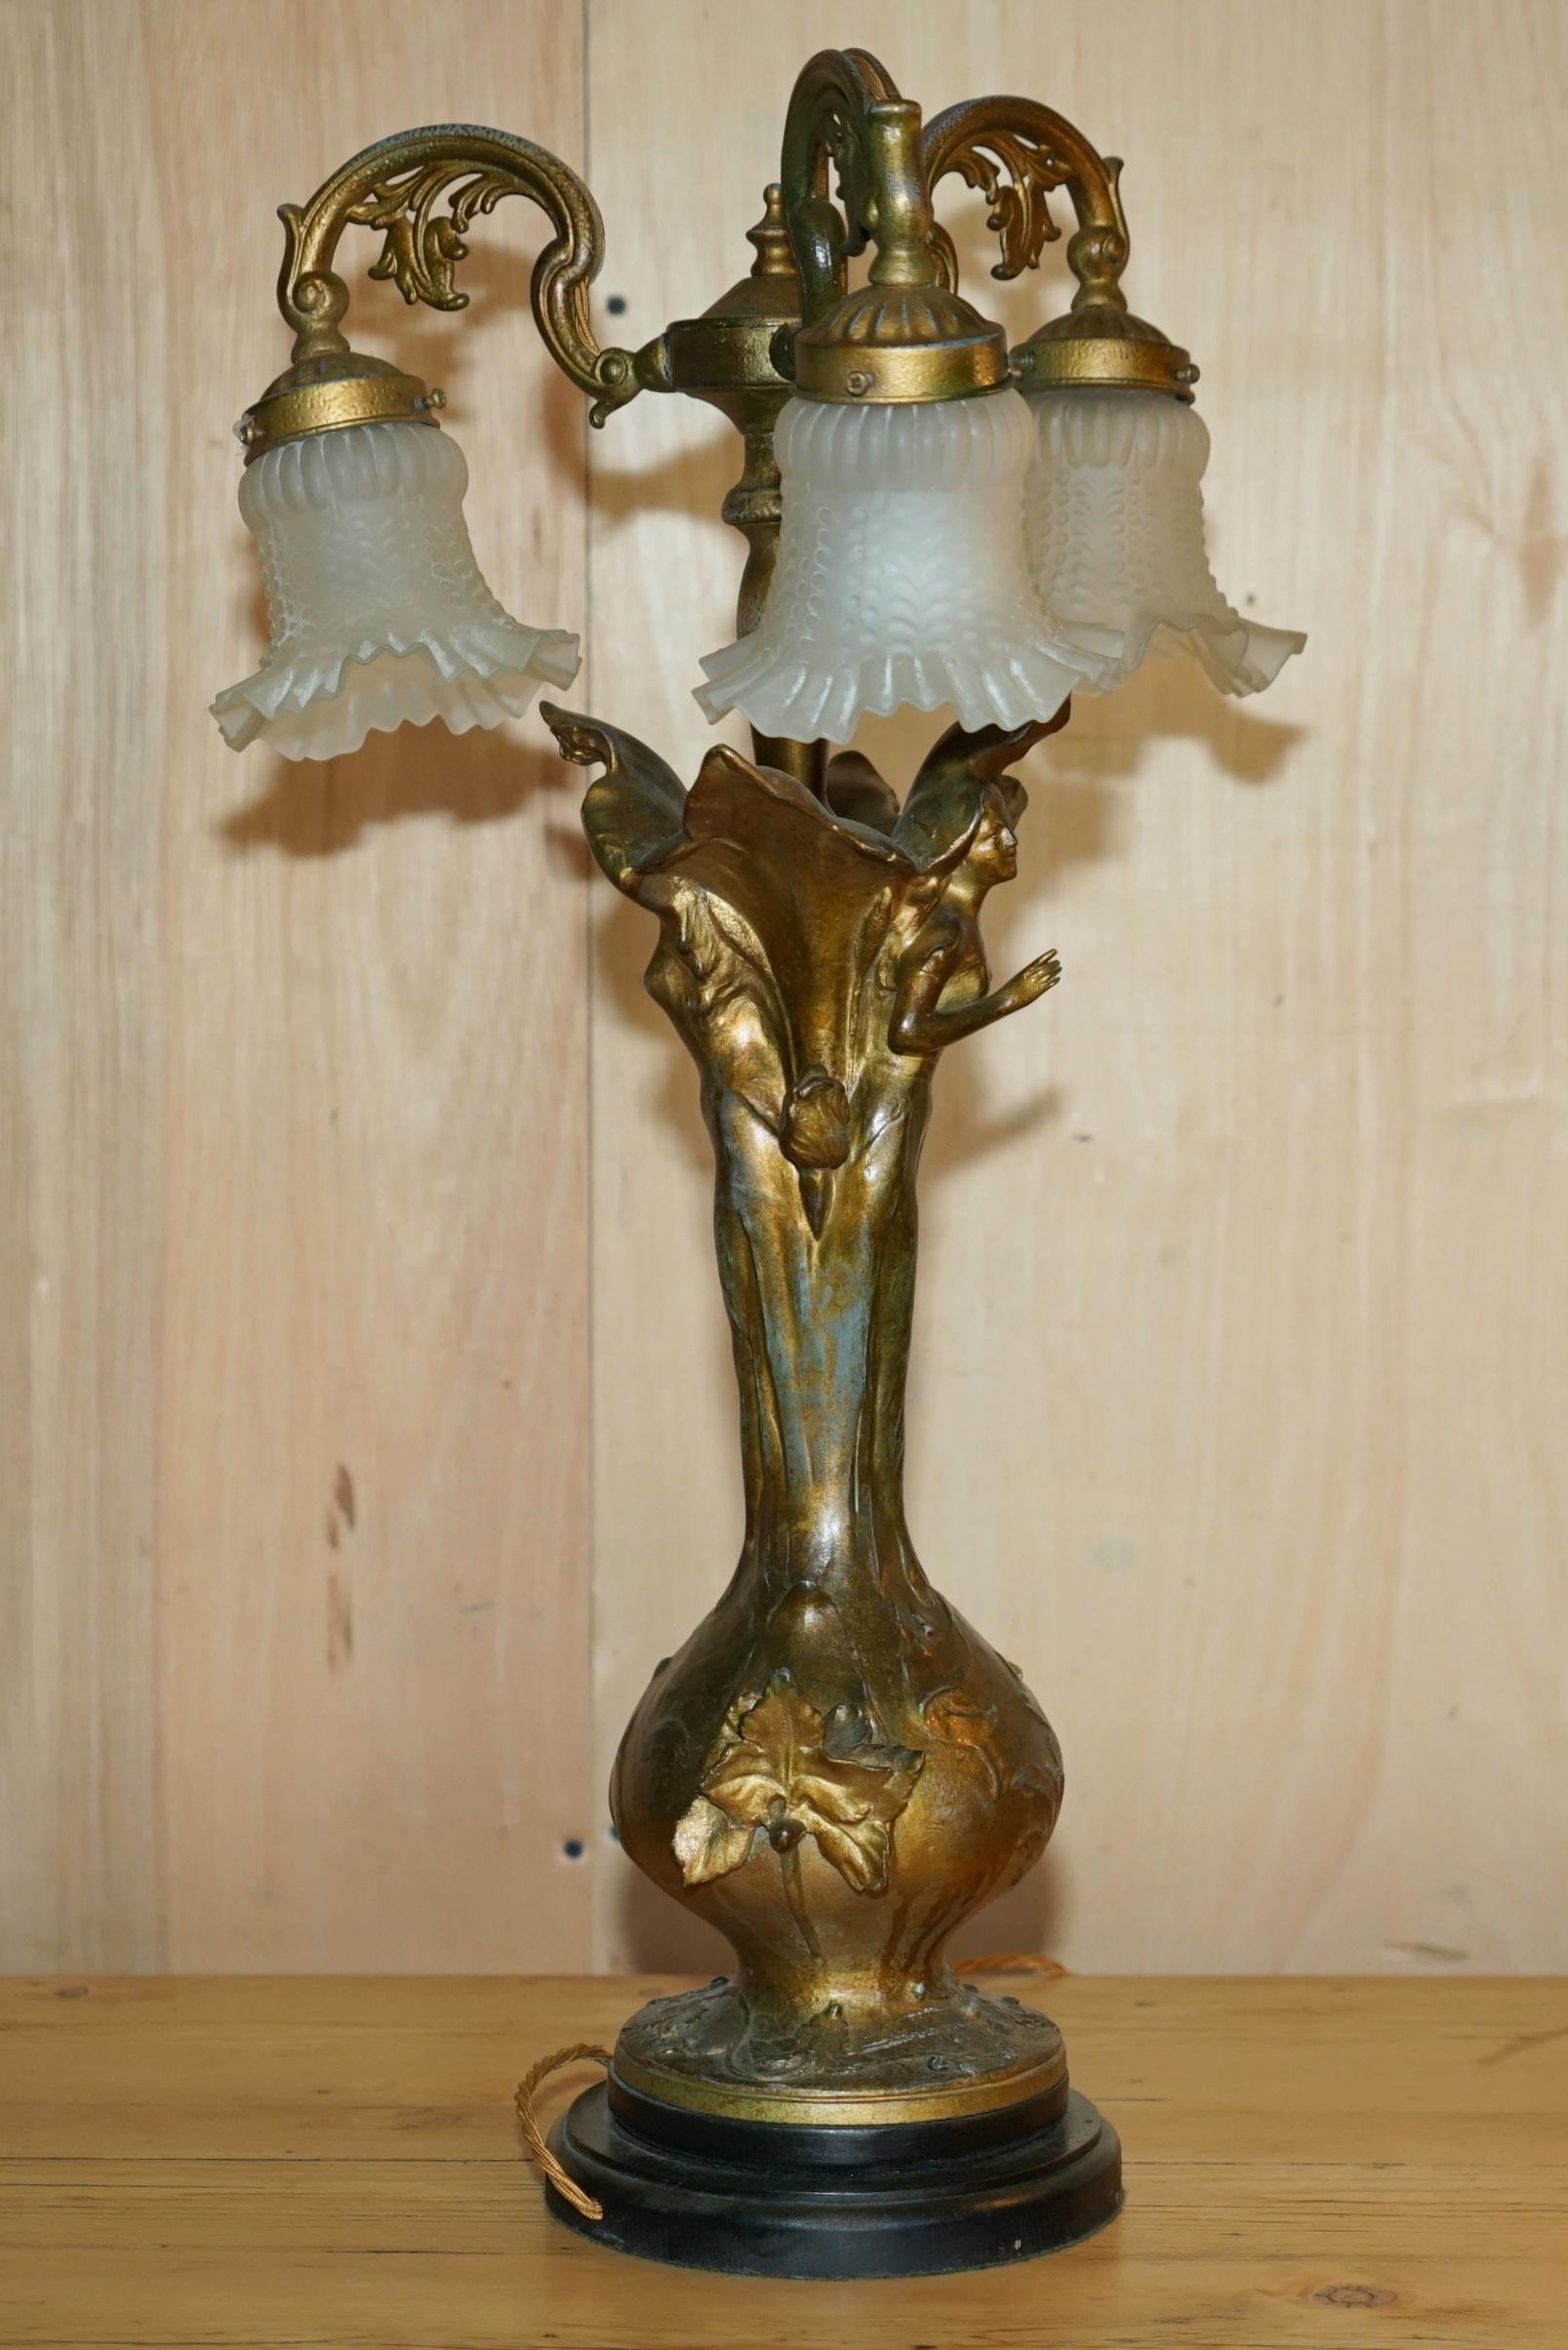 STUNNING PAIR OF LARGE ViNTAGE ART NOUVEAU BRONZED THREE BRANCH TABLE LAMPS For Sale 3